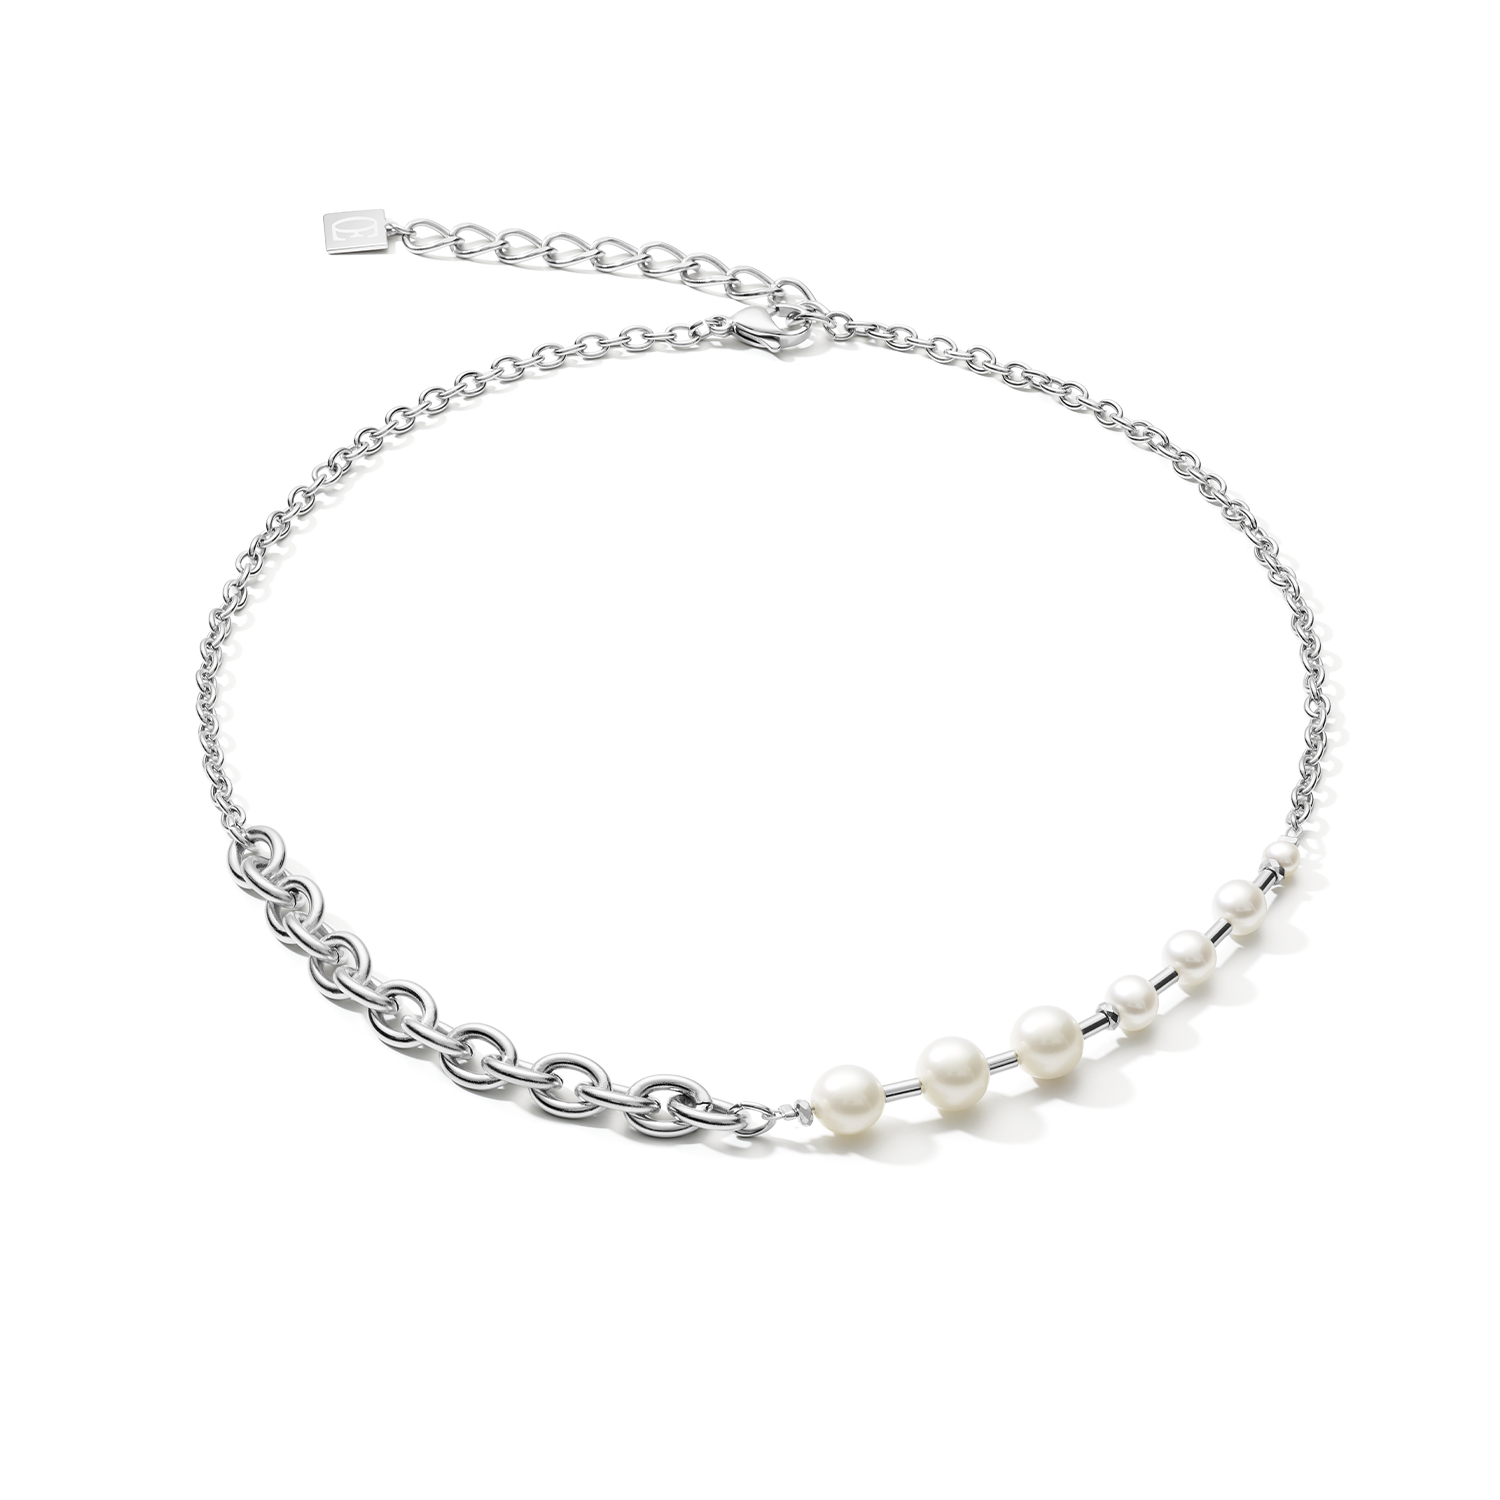 Necklace classic & modern Freshwater pearls & stainless steel chain white-silver